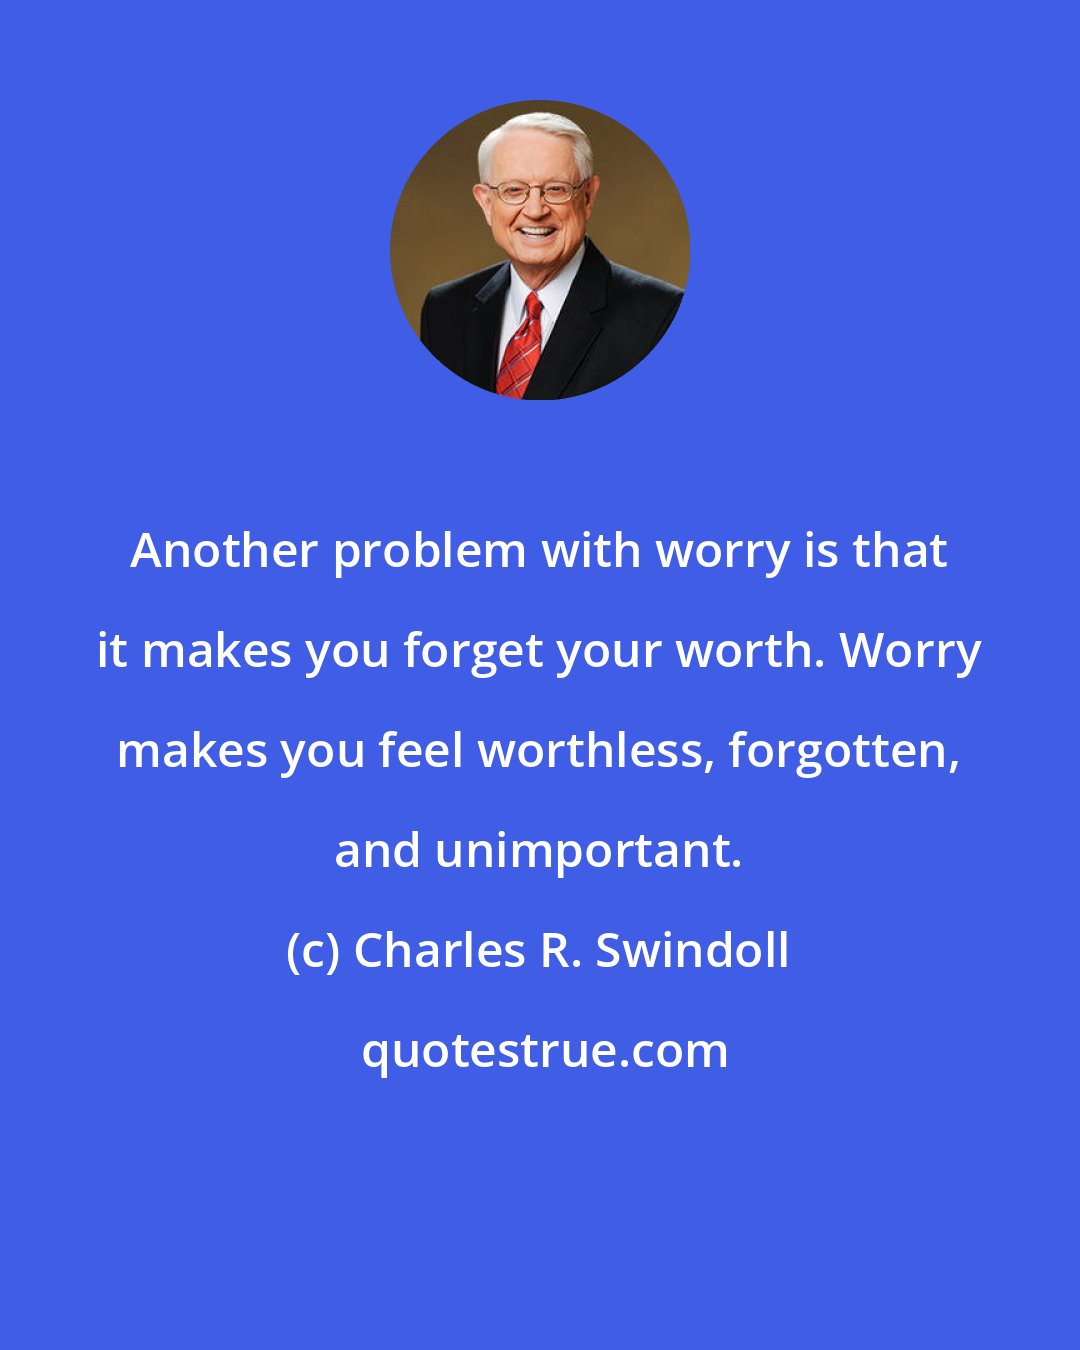 Charles R. Swindoll: Another problem with worry is that it makes you forget your worth. Worry makes you feel worthless, forgotten, and unimportant.